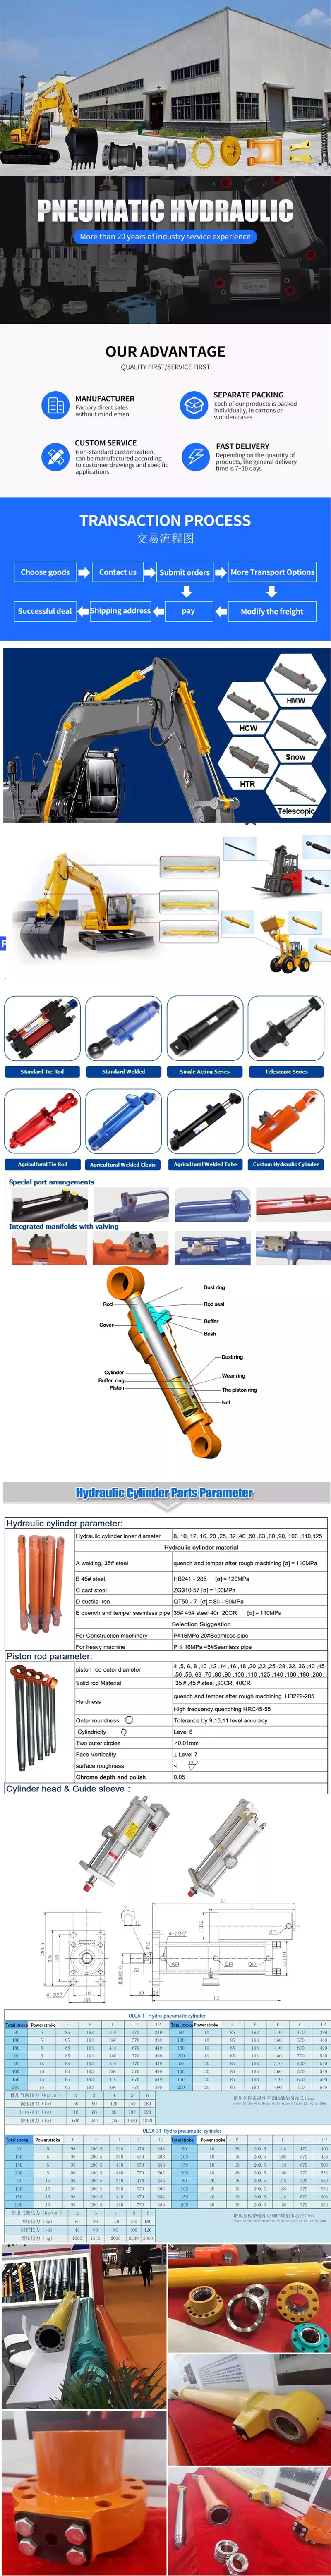 China Custom Front-End Telescopic Multistage Hydraulic Oil Cylinder for Dump Truck   vacuum pump brakes